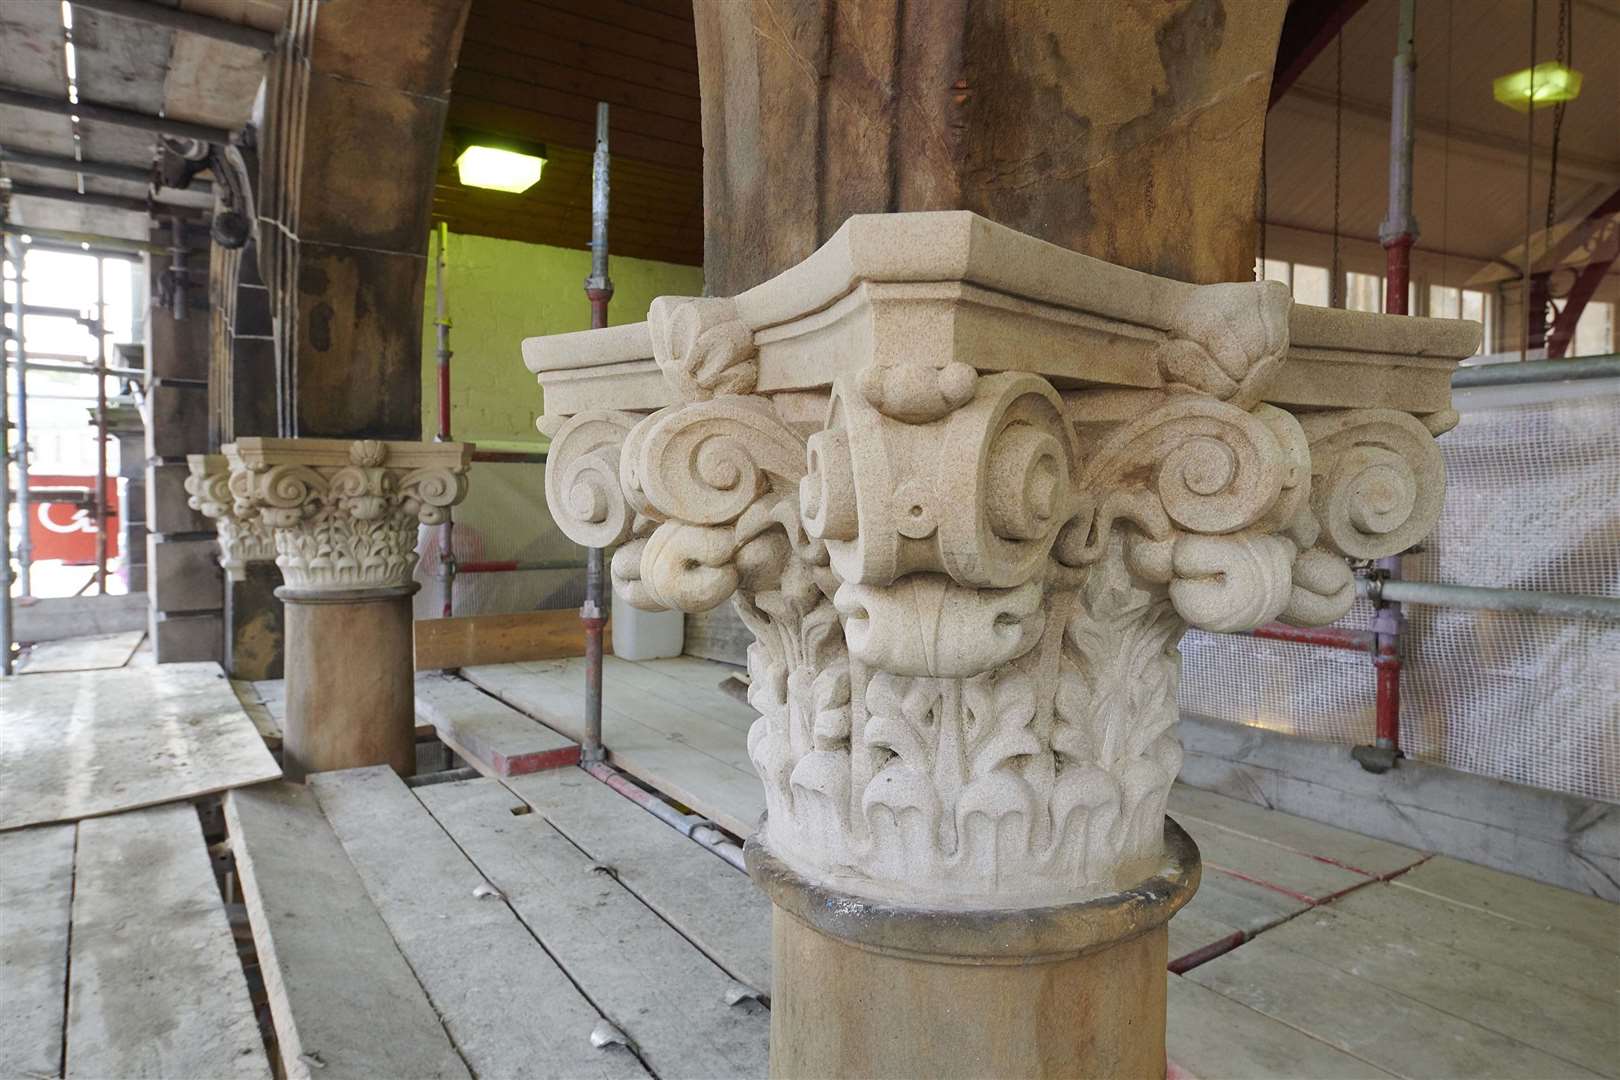 The detail of the Corinthian column tops can be seen clearly.